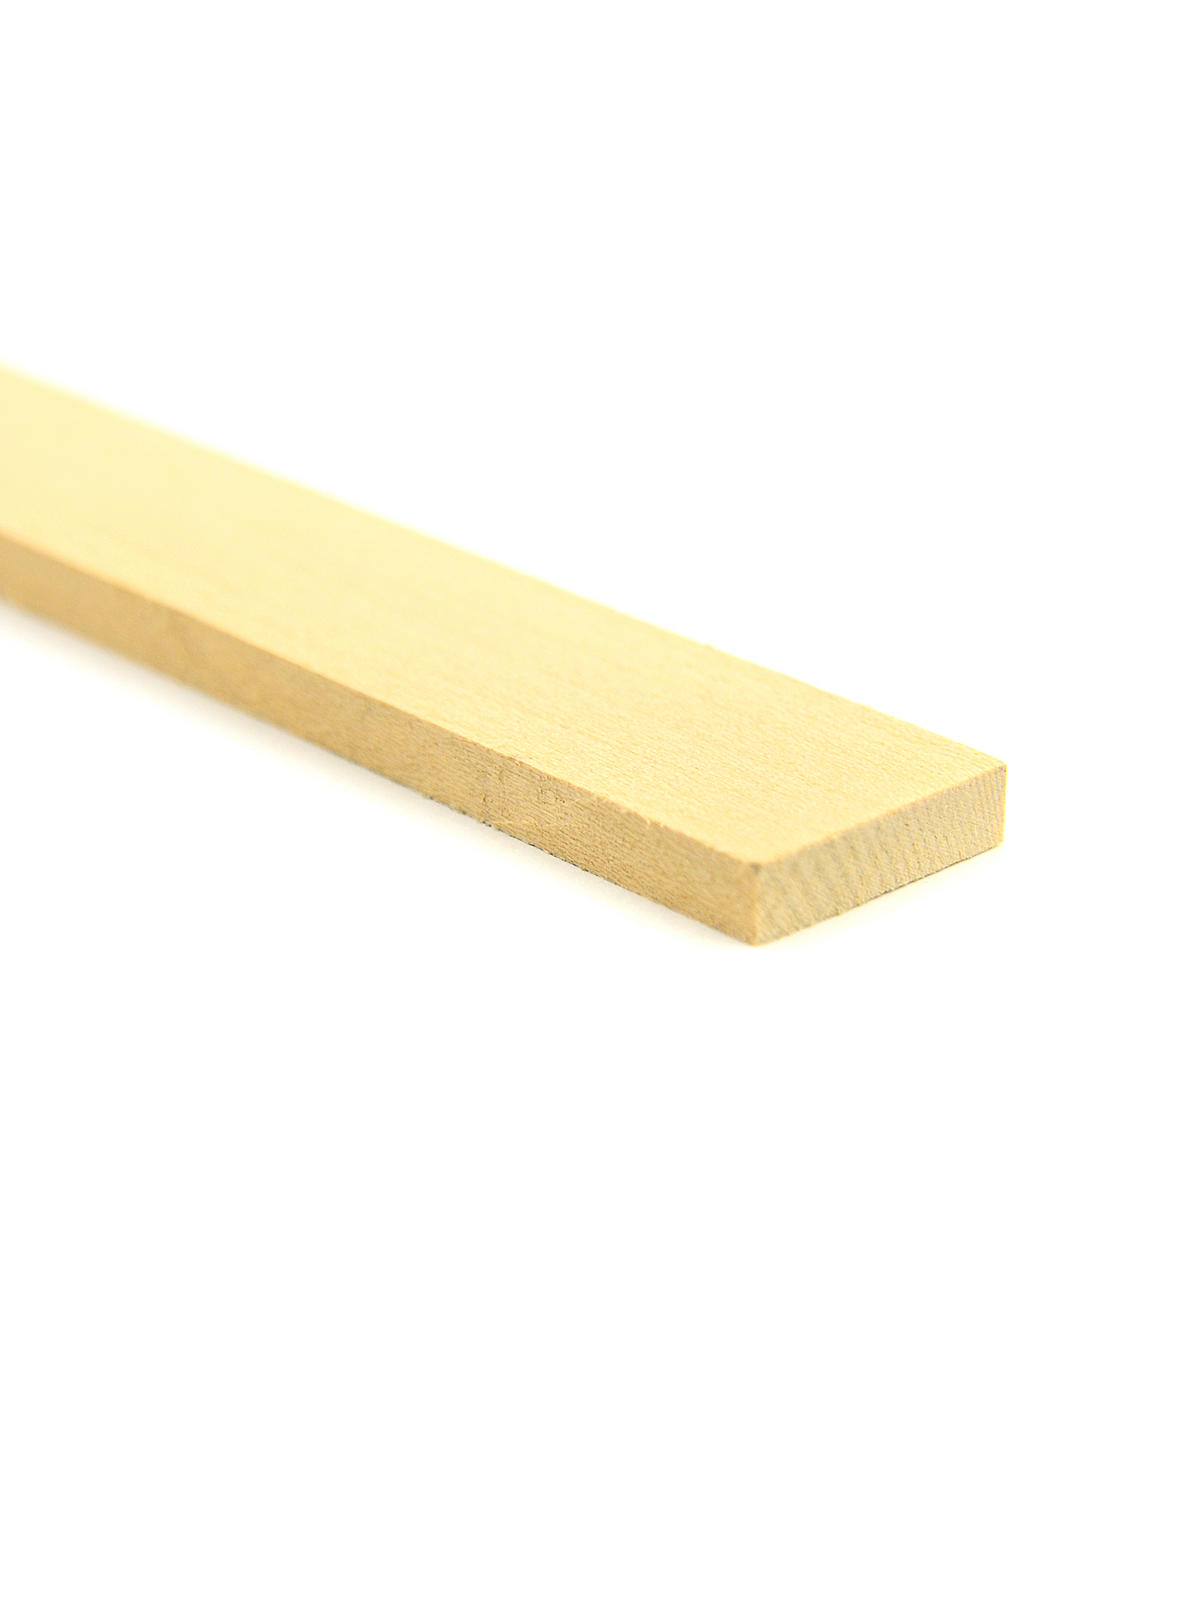 Basswood Sheets 1 4 In. 1 In. X 24 In.